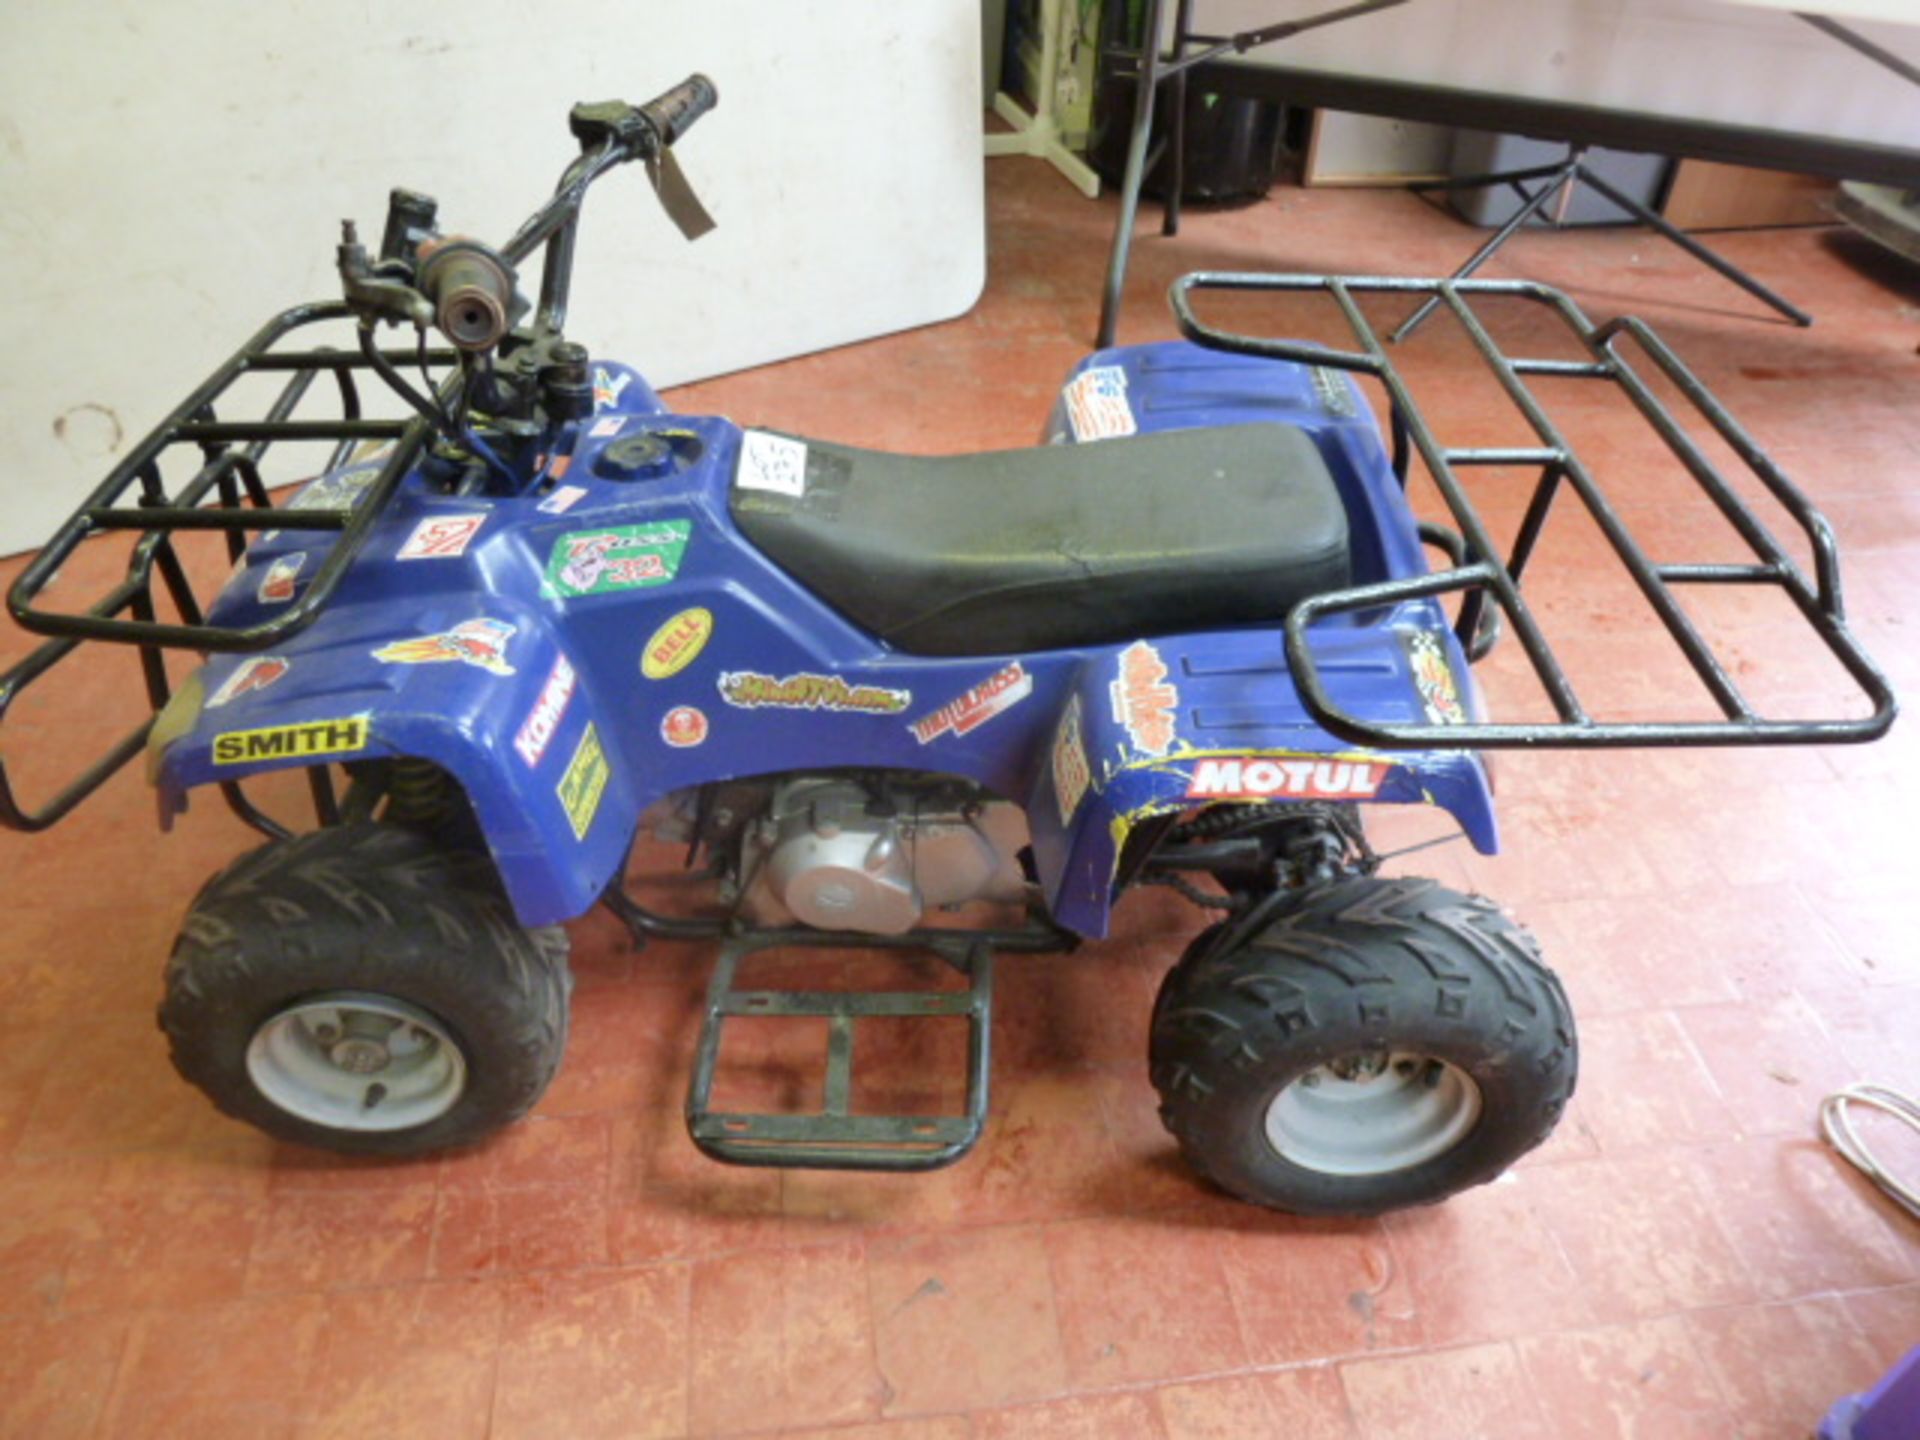 Mini ATV Petrol Quad Bike in Blue. Condition Unknown, For Spares & Repair (As Viewed) - Image 6 of 9